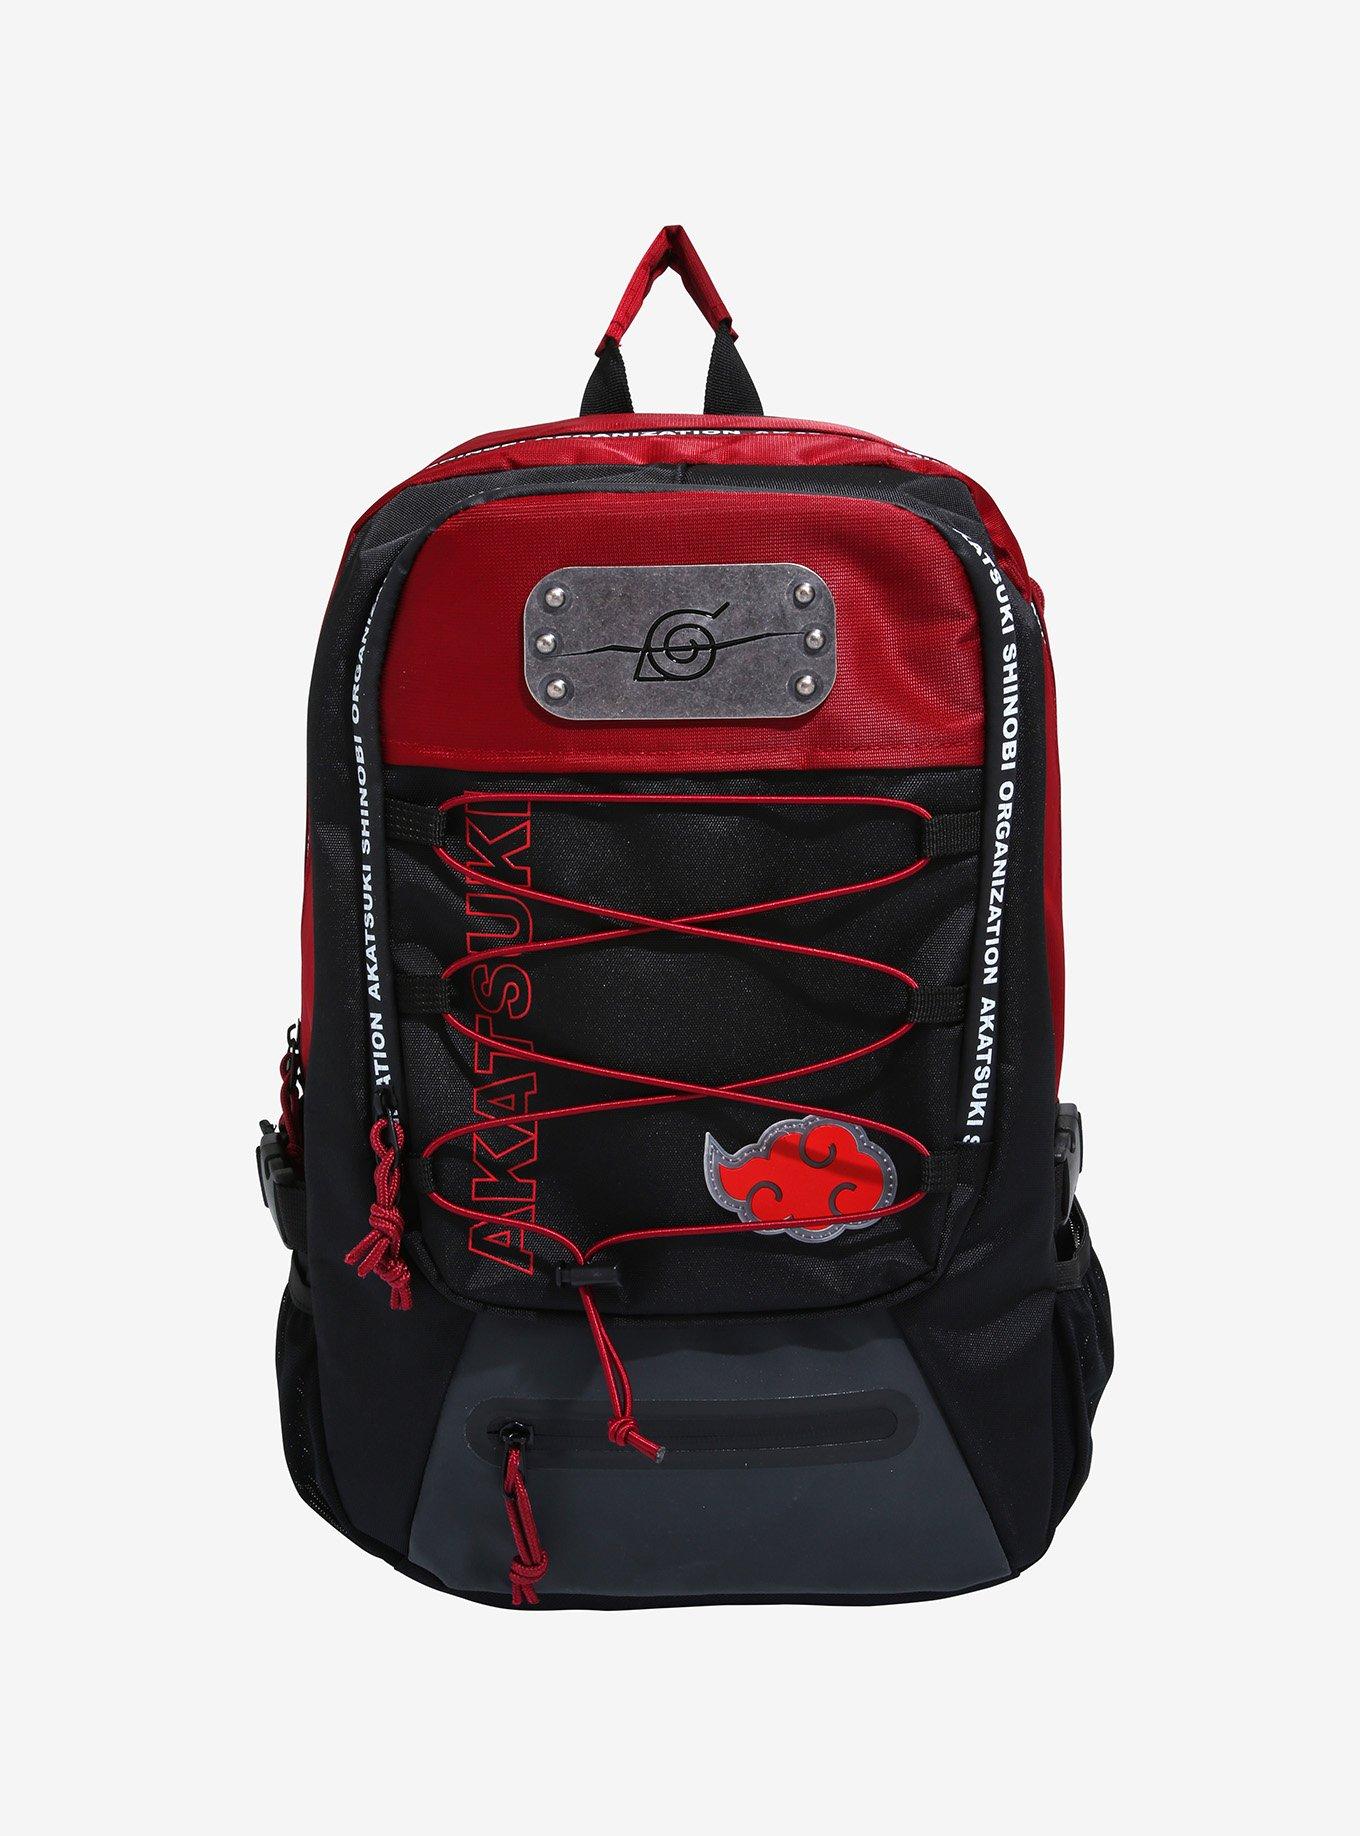 Naruto Backpack - Shippuden for wholesale sourcing !